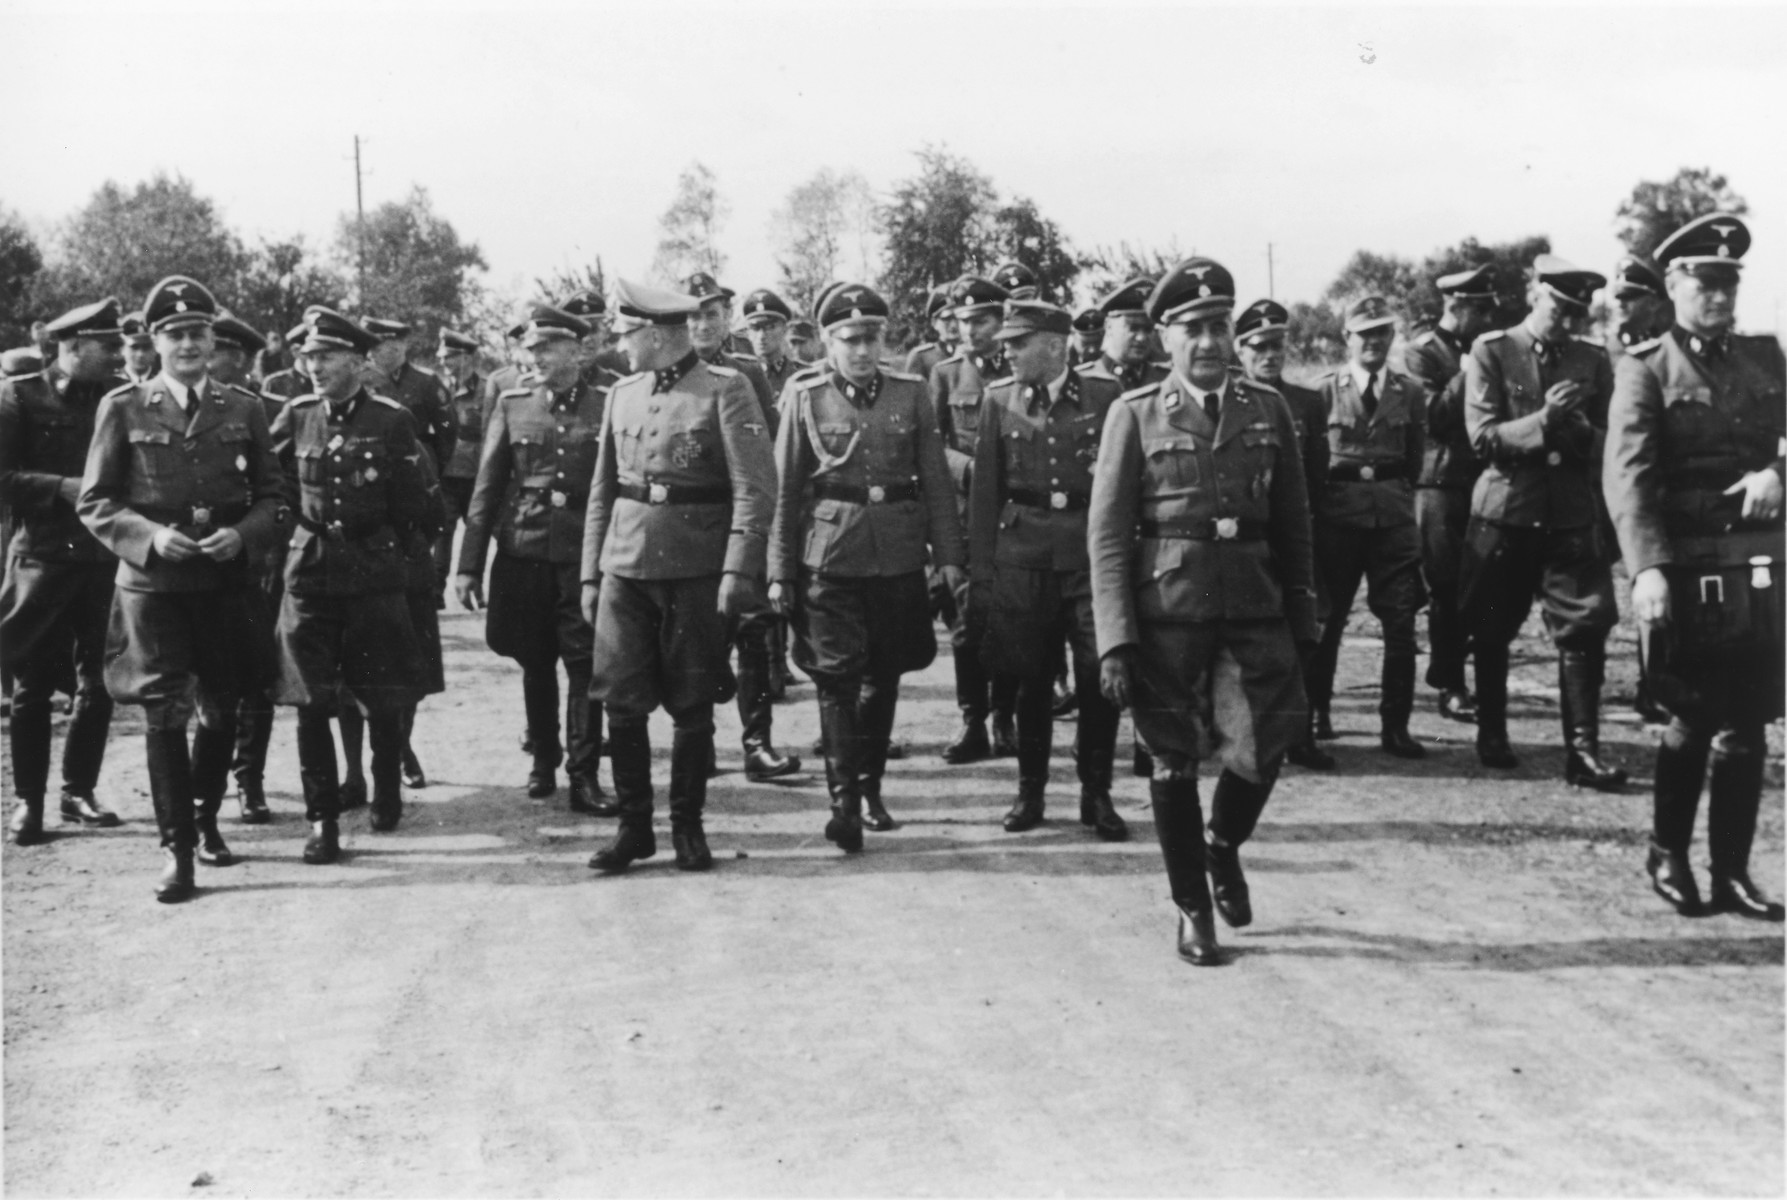 Nazi officers walk towards the dedication of the new SS hospital in Auschwitz.

The original caption reads "Besichtigung" (tour).

In the front (center left) is Karl Bischoff head of construction in Silesia.  Dr. Eduard Wirths is on the far left.  Next to him is Dr. Lolling.  Also pictured are Richard Baer, Karl Hoecker, Dr. Heinz Baumkoetter and Rudolf Hoess.